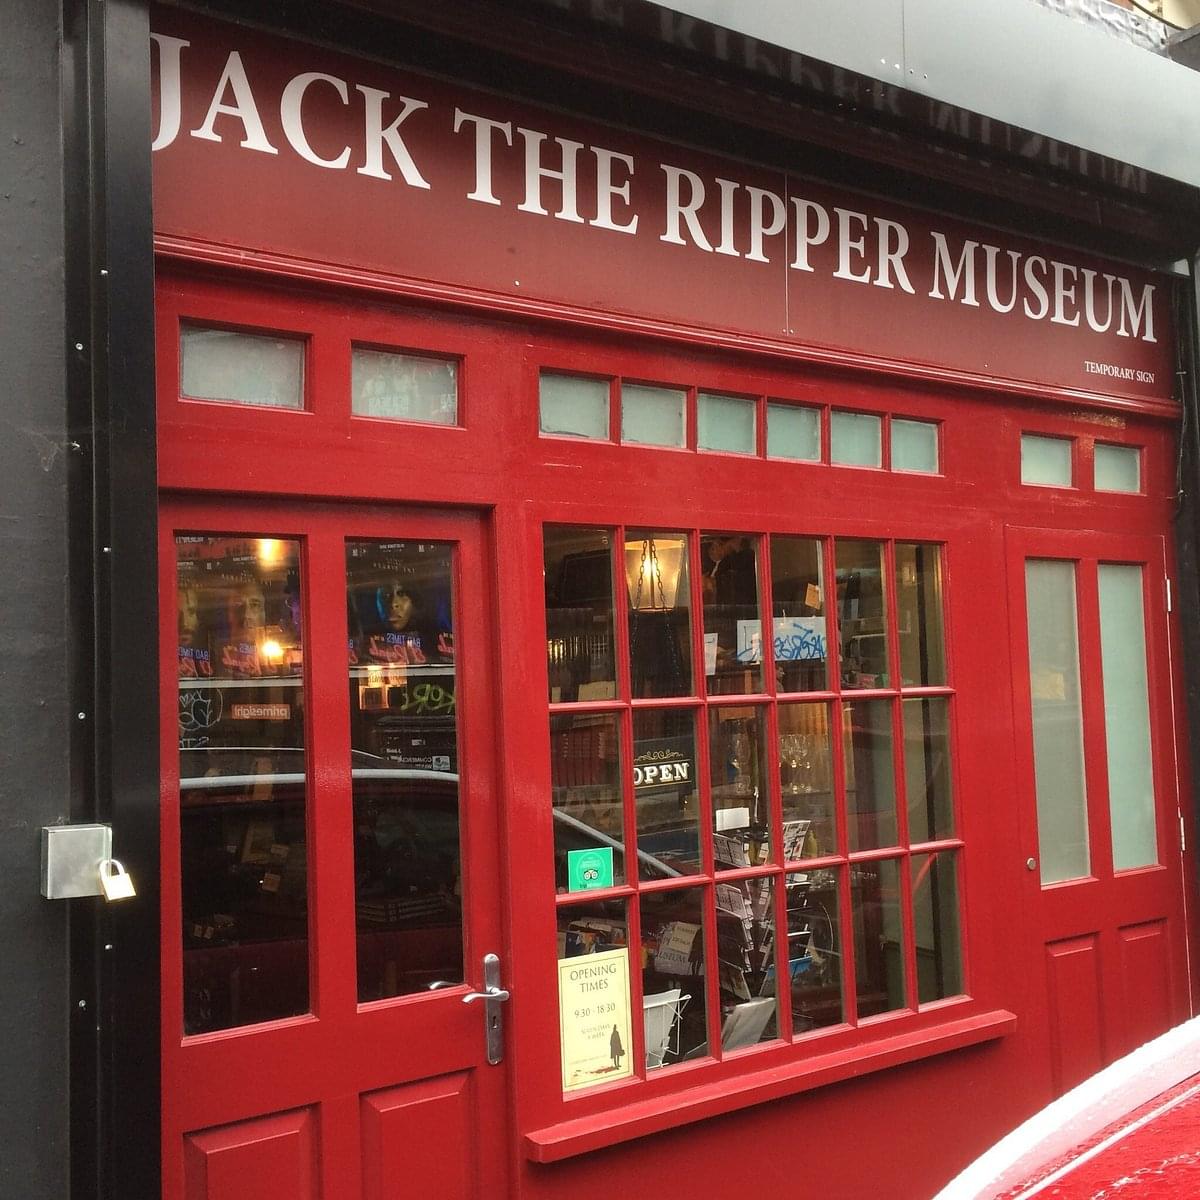 Know the dark tales of London in this museum